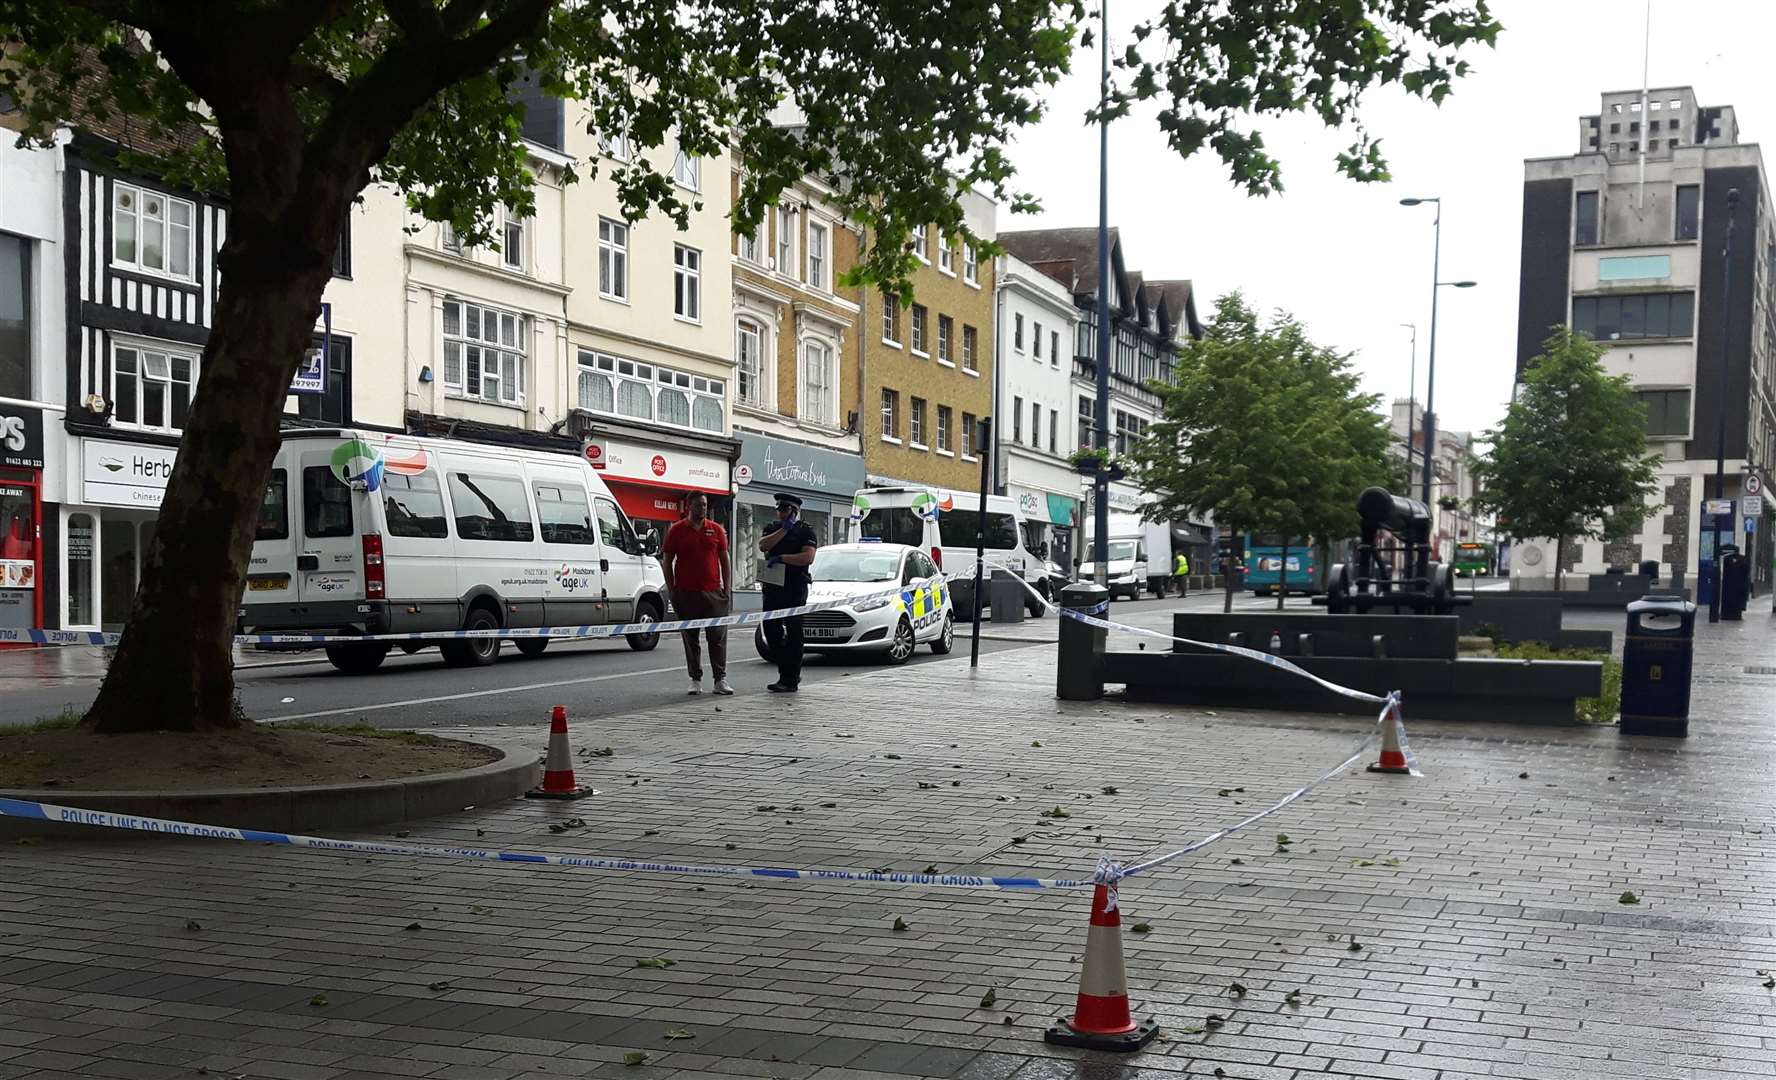 The scene in Maidstone High Street this morning (11895539)